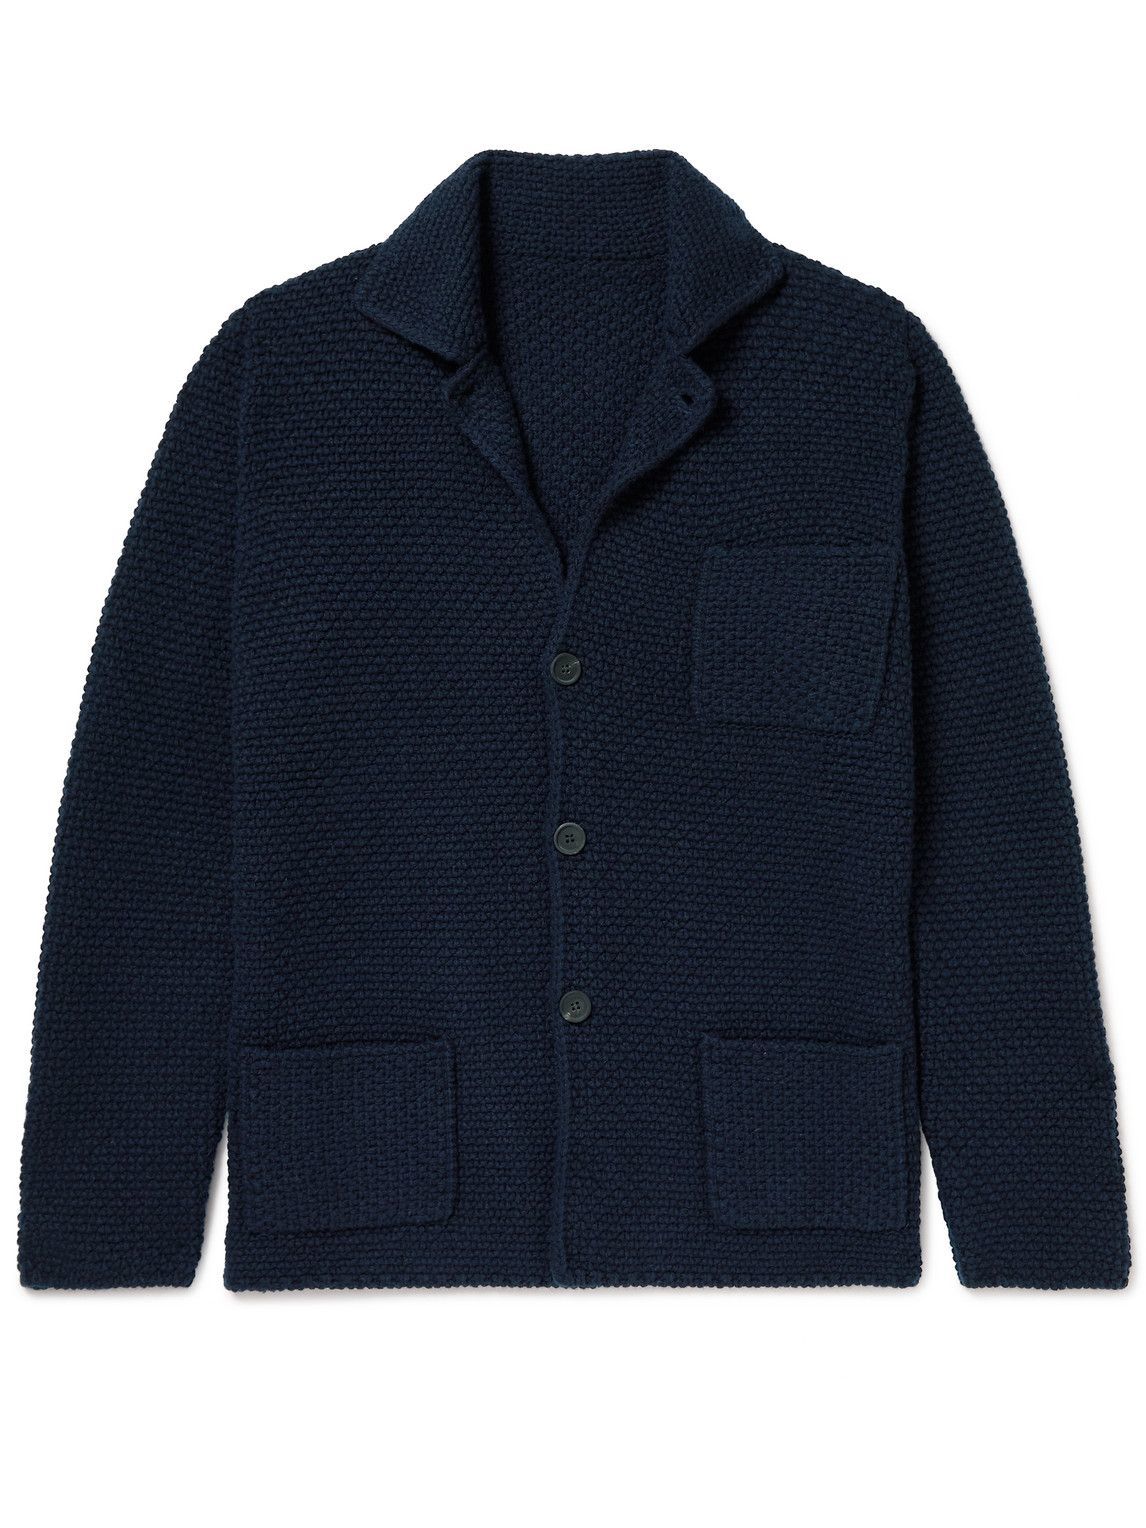 Anderson & Sheppard - Slim-Fit Textured Wool and Cashmere-Blend ...